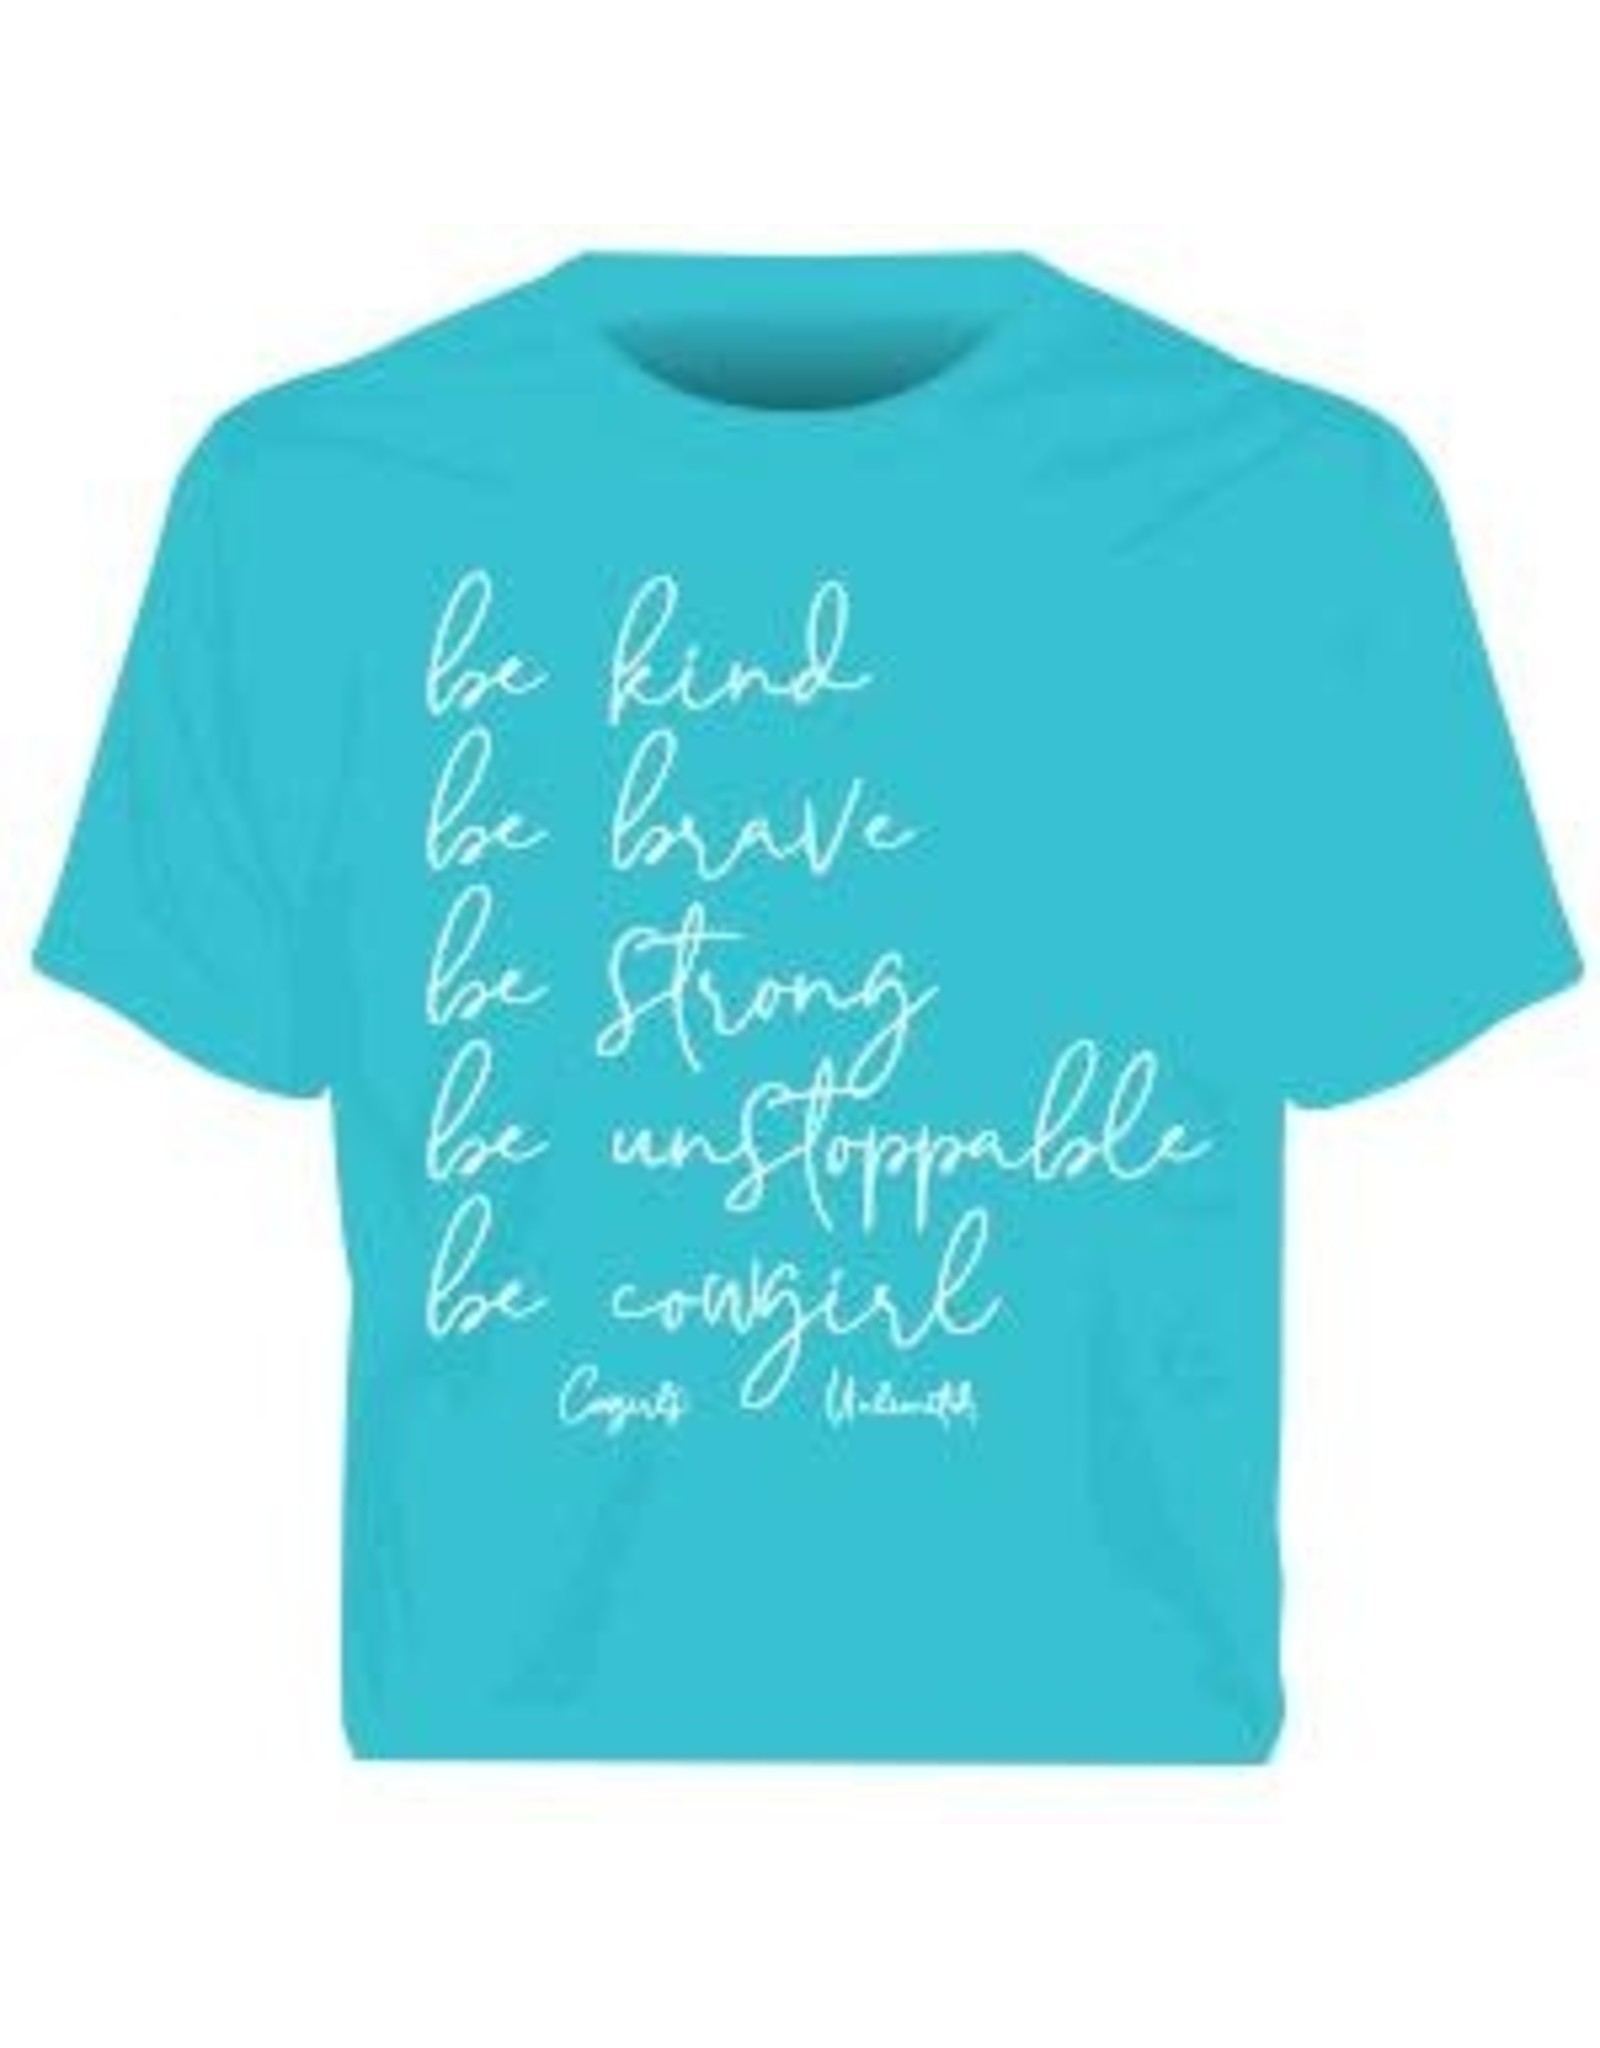 Moss Bros Ladies "Be Cowgirl" CH-1926 Neon Blue T-Shirt